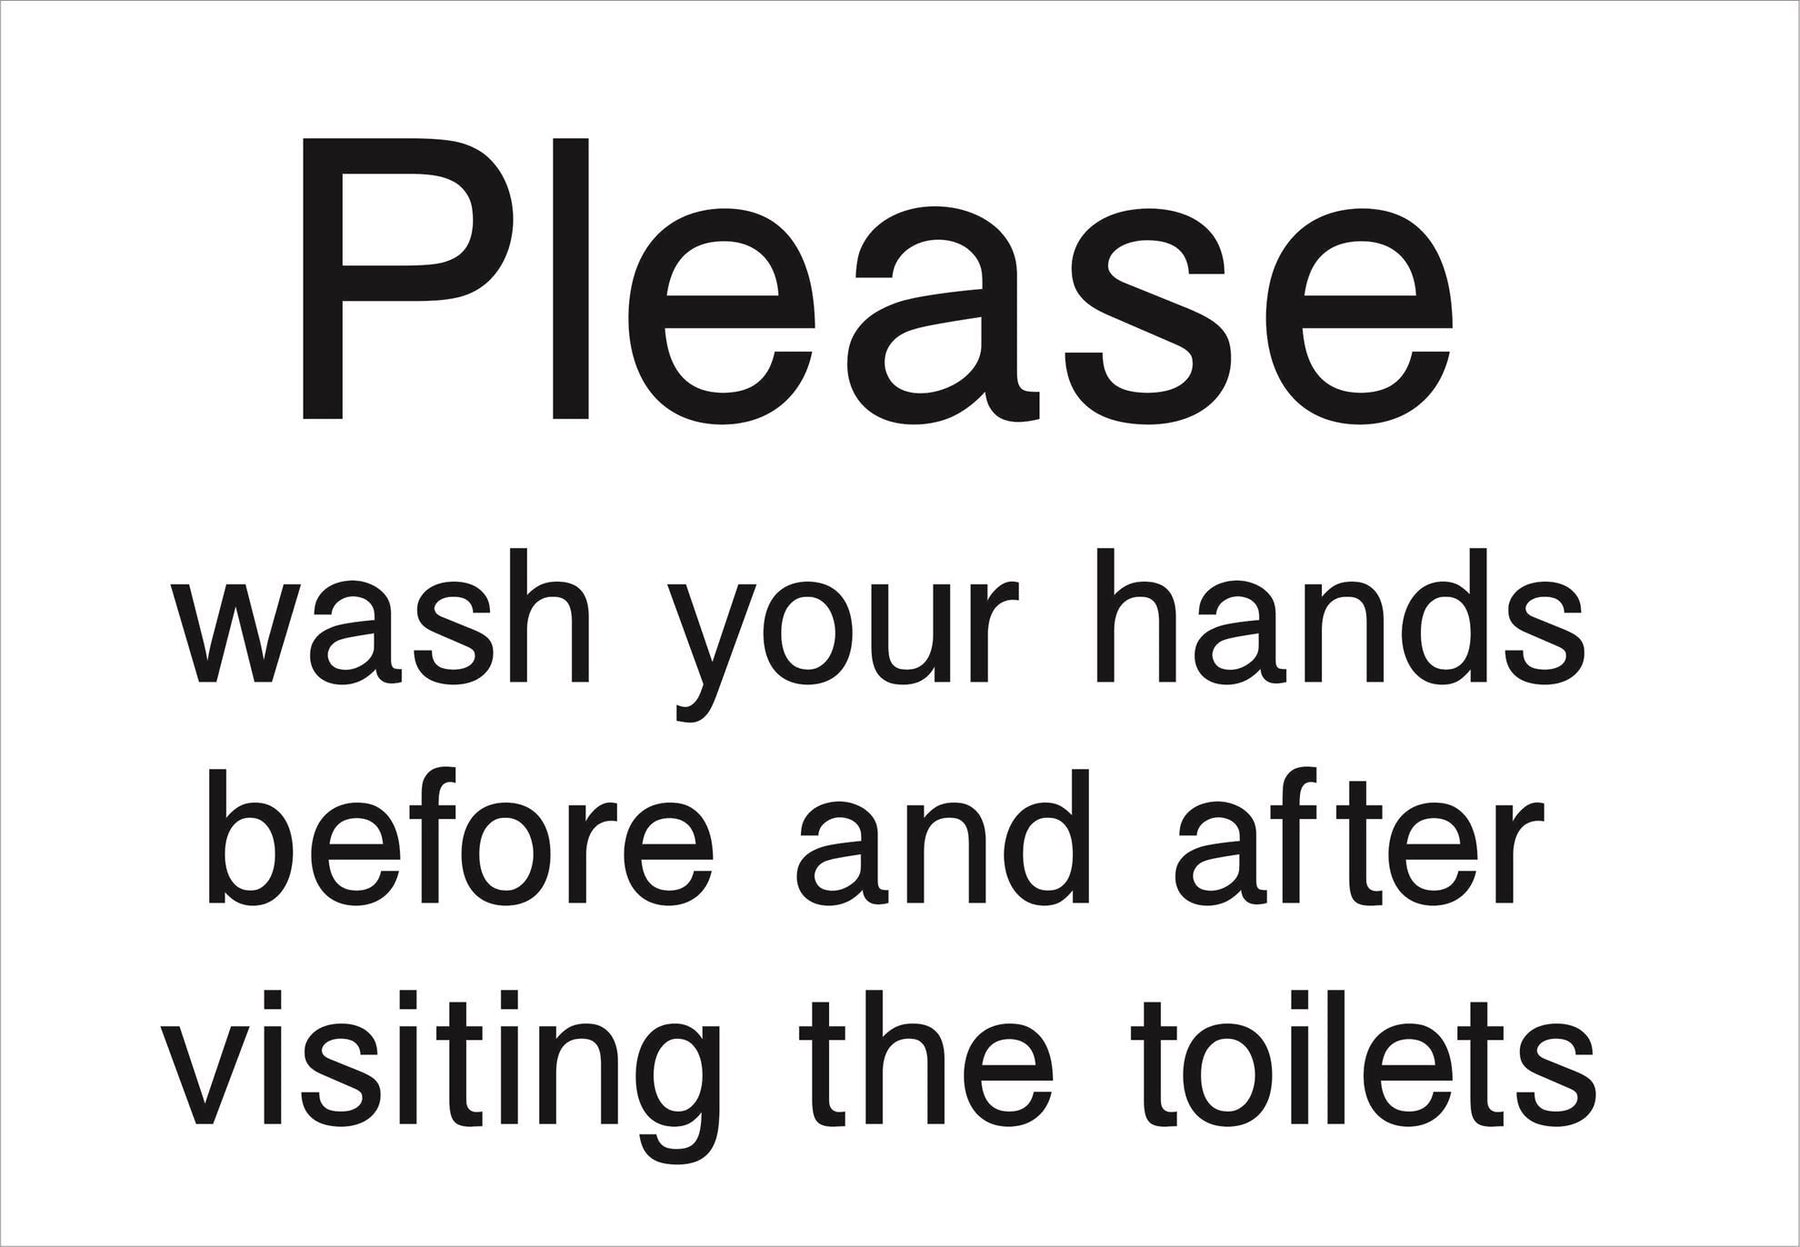 Please wash your hands before and after visiting the toilets